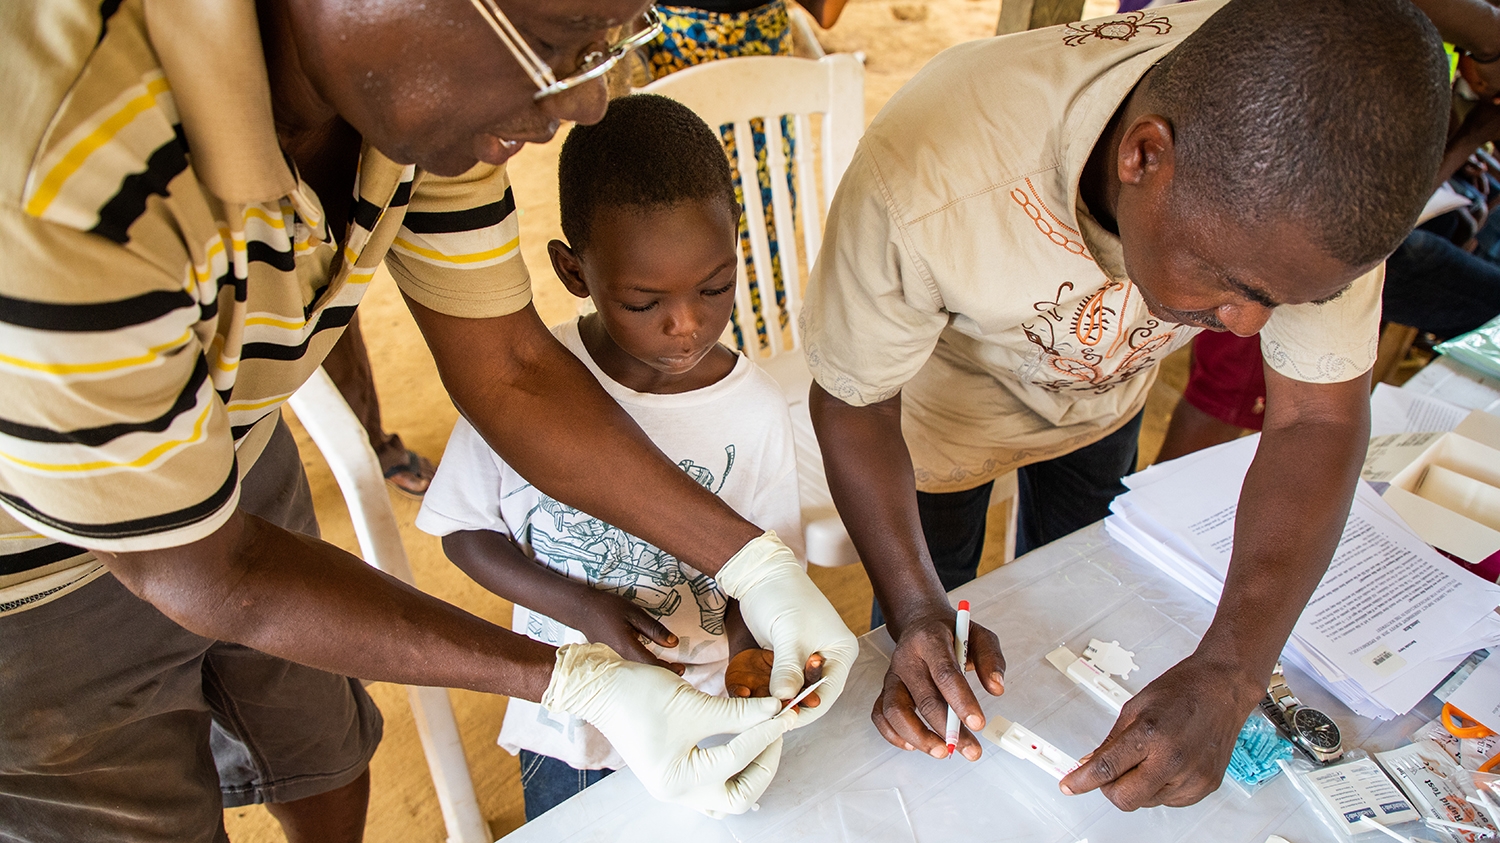 Two male researchers screen a young child from Liberia for onchocerciasis by taking a blood sample.